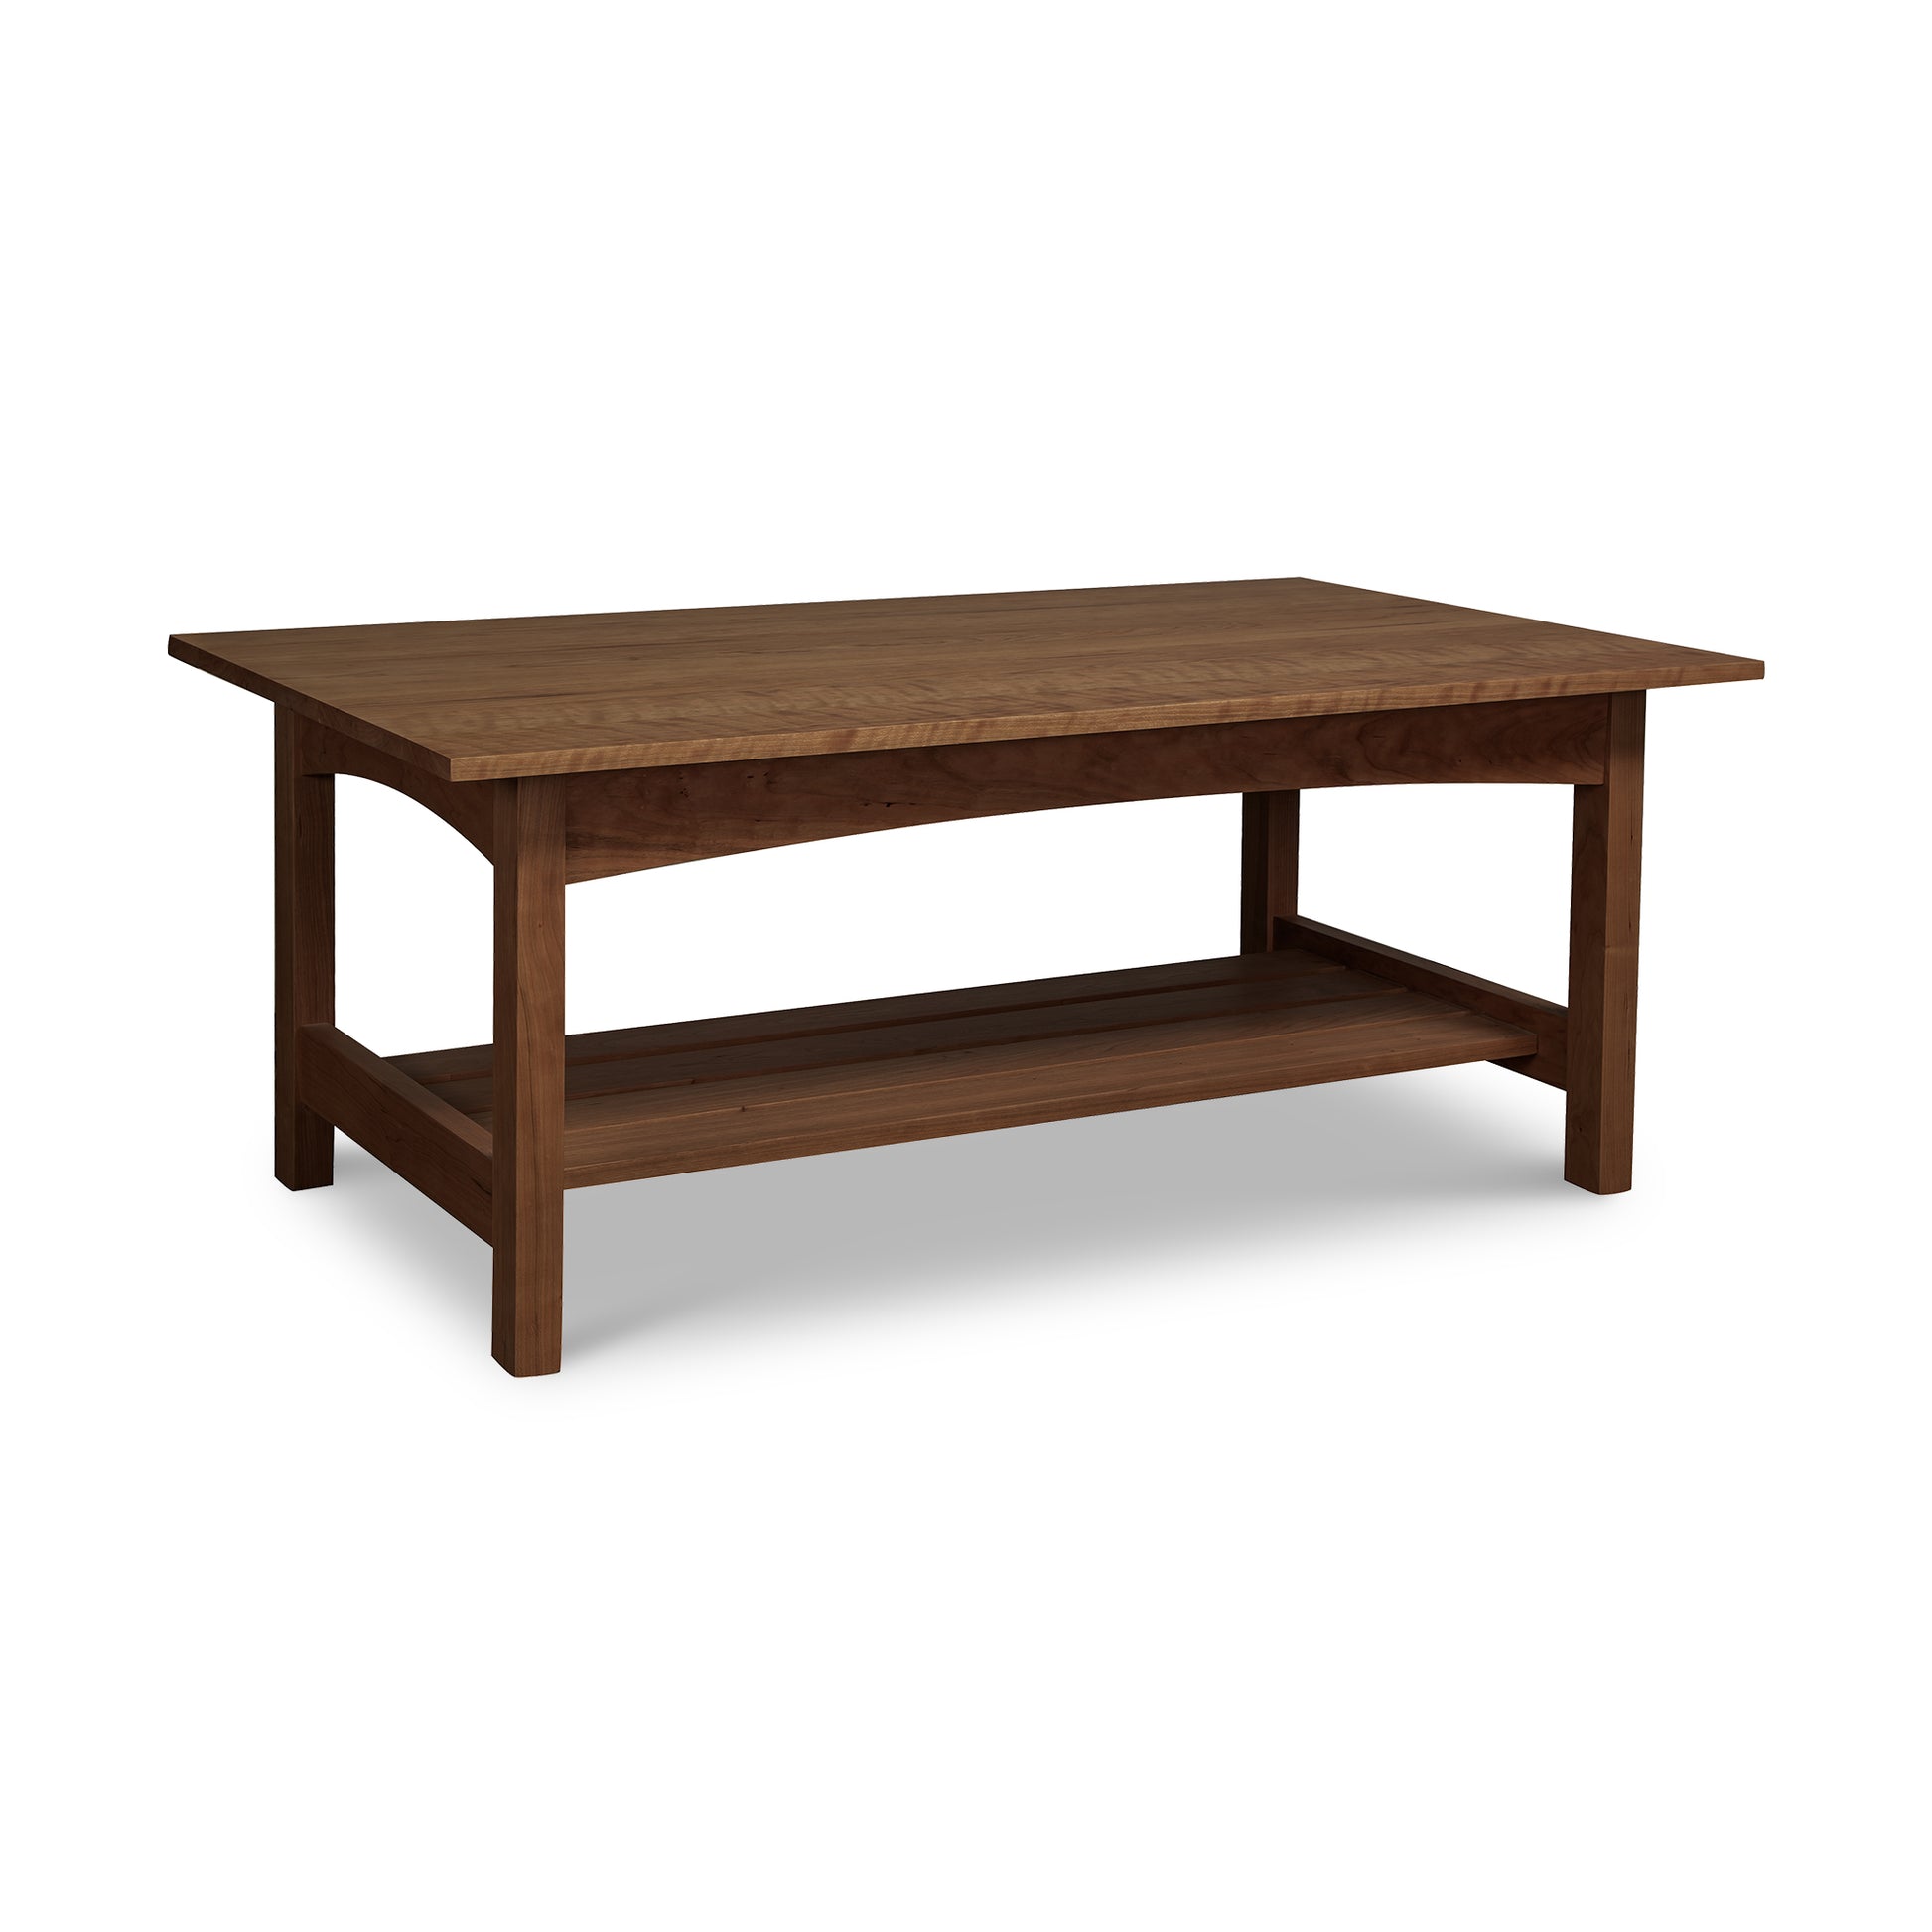 A handmade, solid wood Vermont Furniture Designs Burlington Shaker Coffee Table with a lower shelf on a white background.